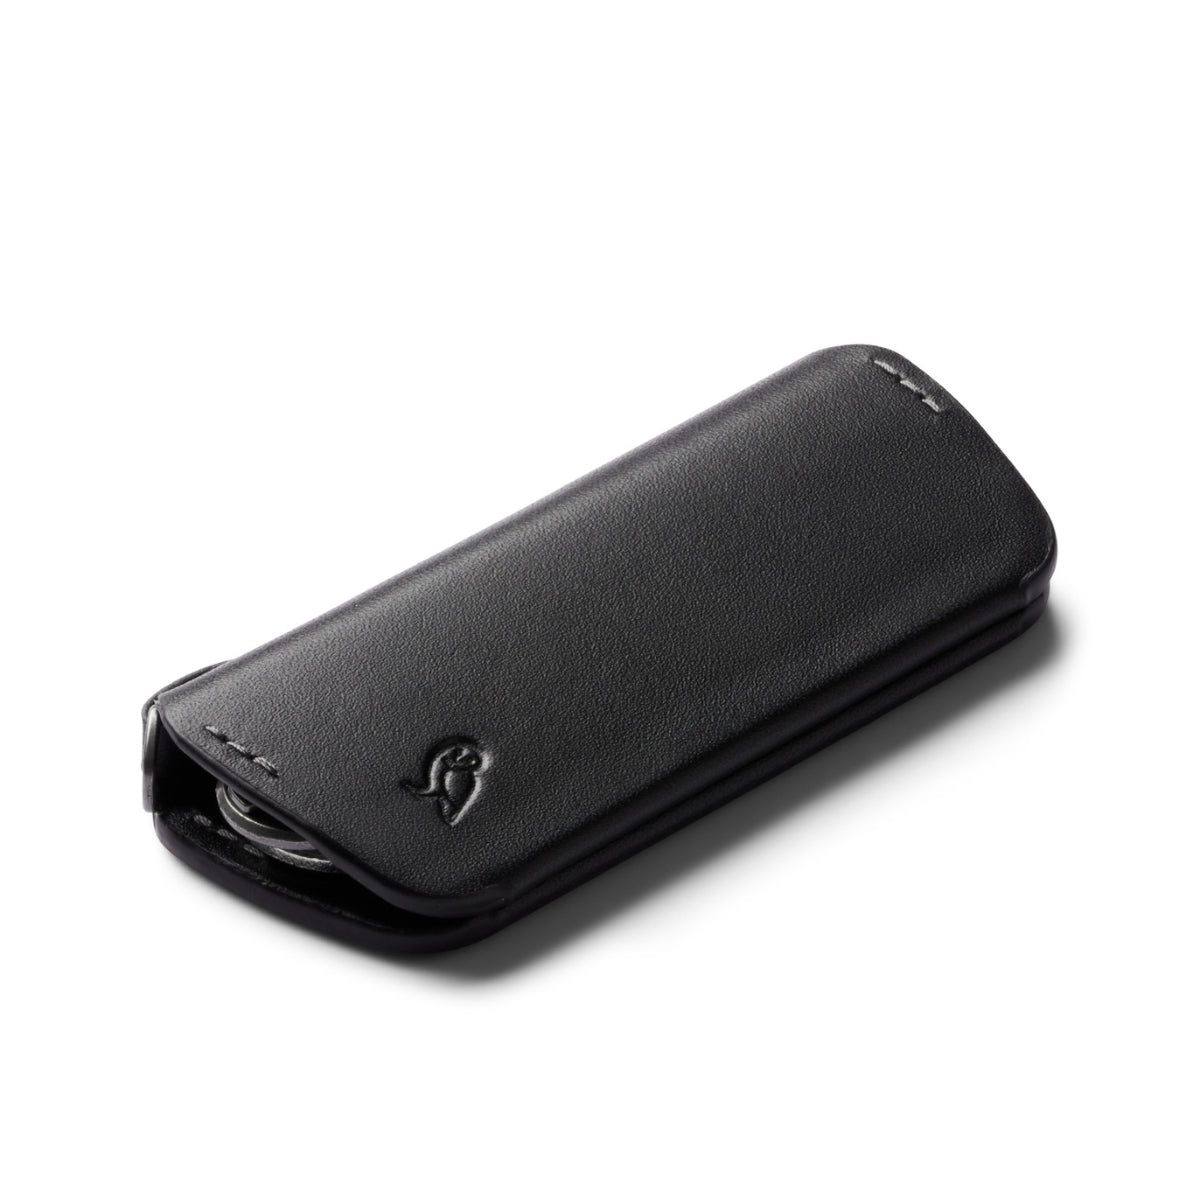 Bellroy Key Cover Plus (Third Edition) in Black